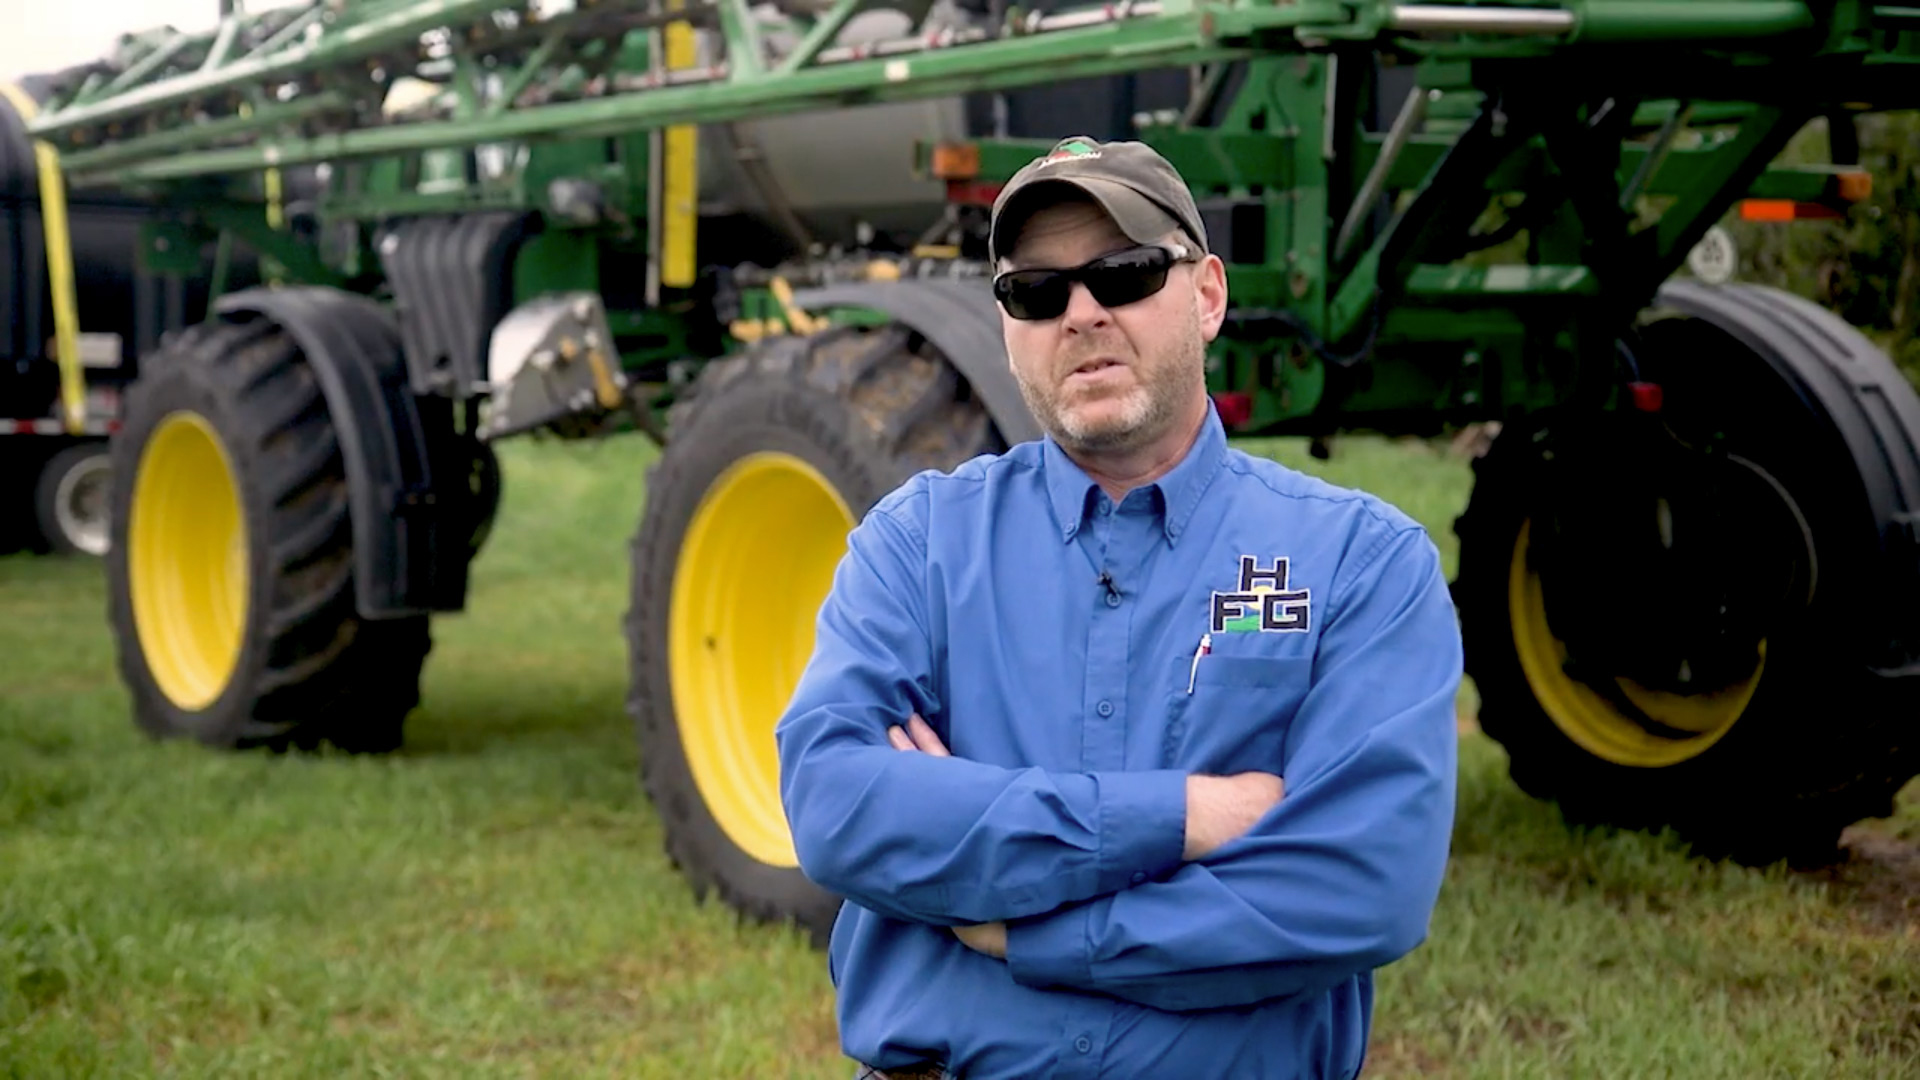 Mark Beason with Herbert Feed & Grains in front of John Deere tractor with LSW tires 